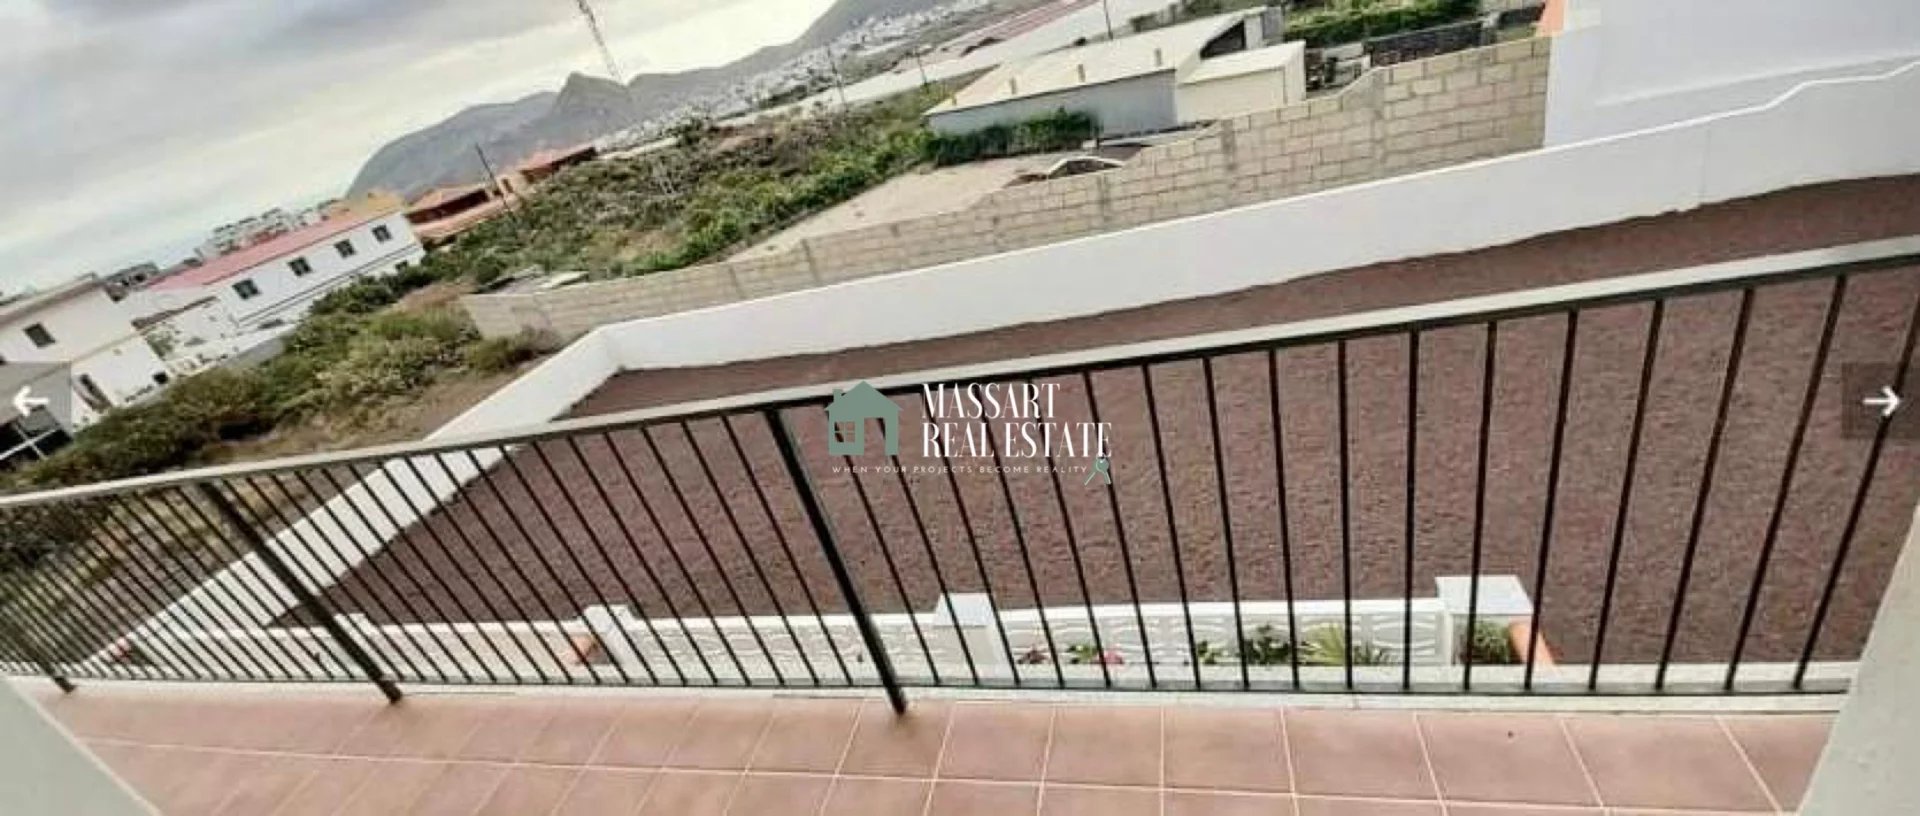 House divided into 4 apartments located on a 900 m2 plot in Buzanada, in a central and quiet area.